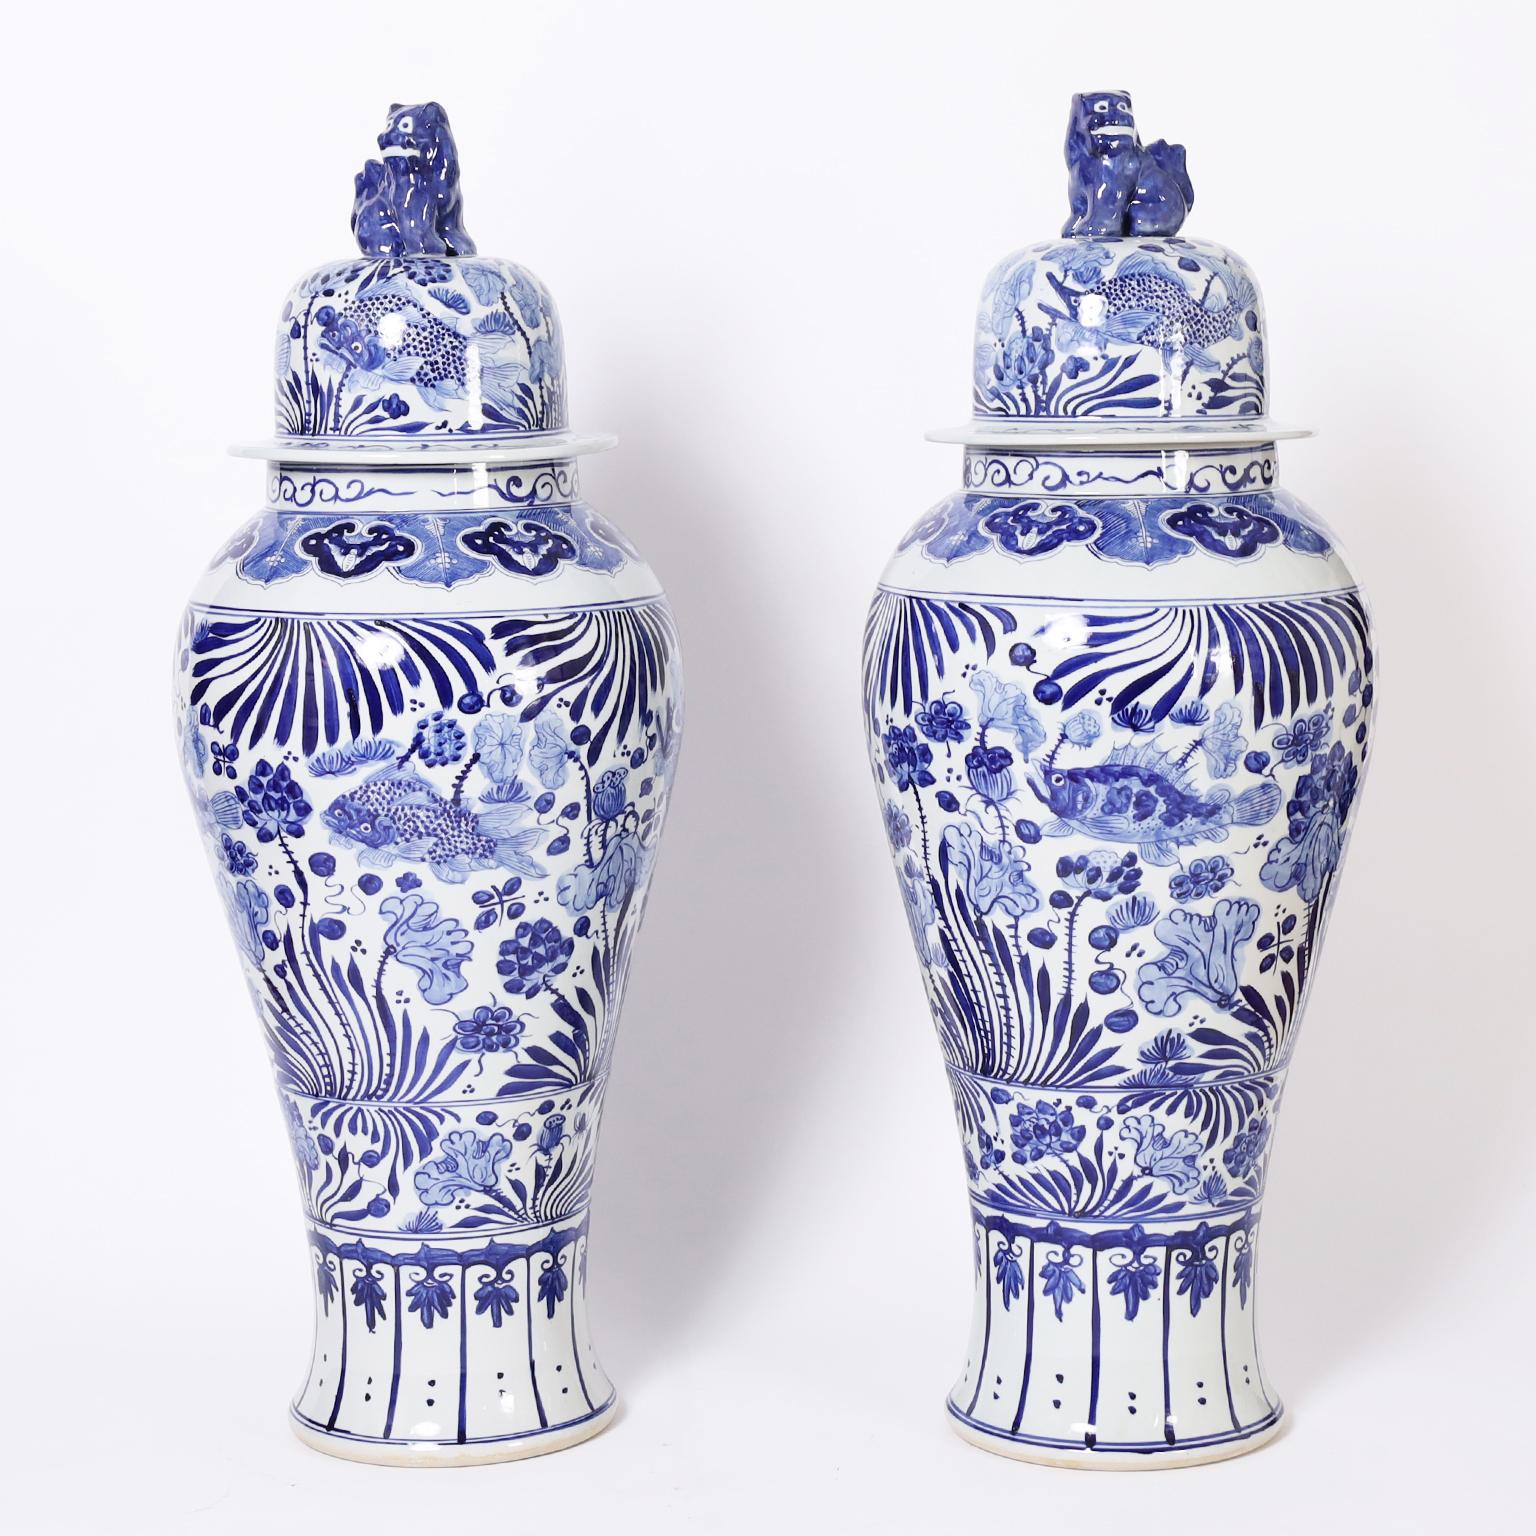 Striking pair of Chinese blue and white porcelain urns with cat lid handles and ambitiously hand decorated with aquatic fauna and flora having a rare touch of whimsy. 